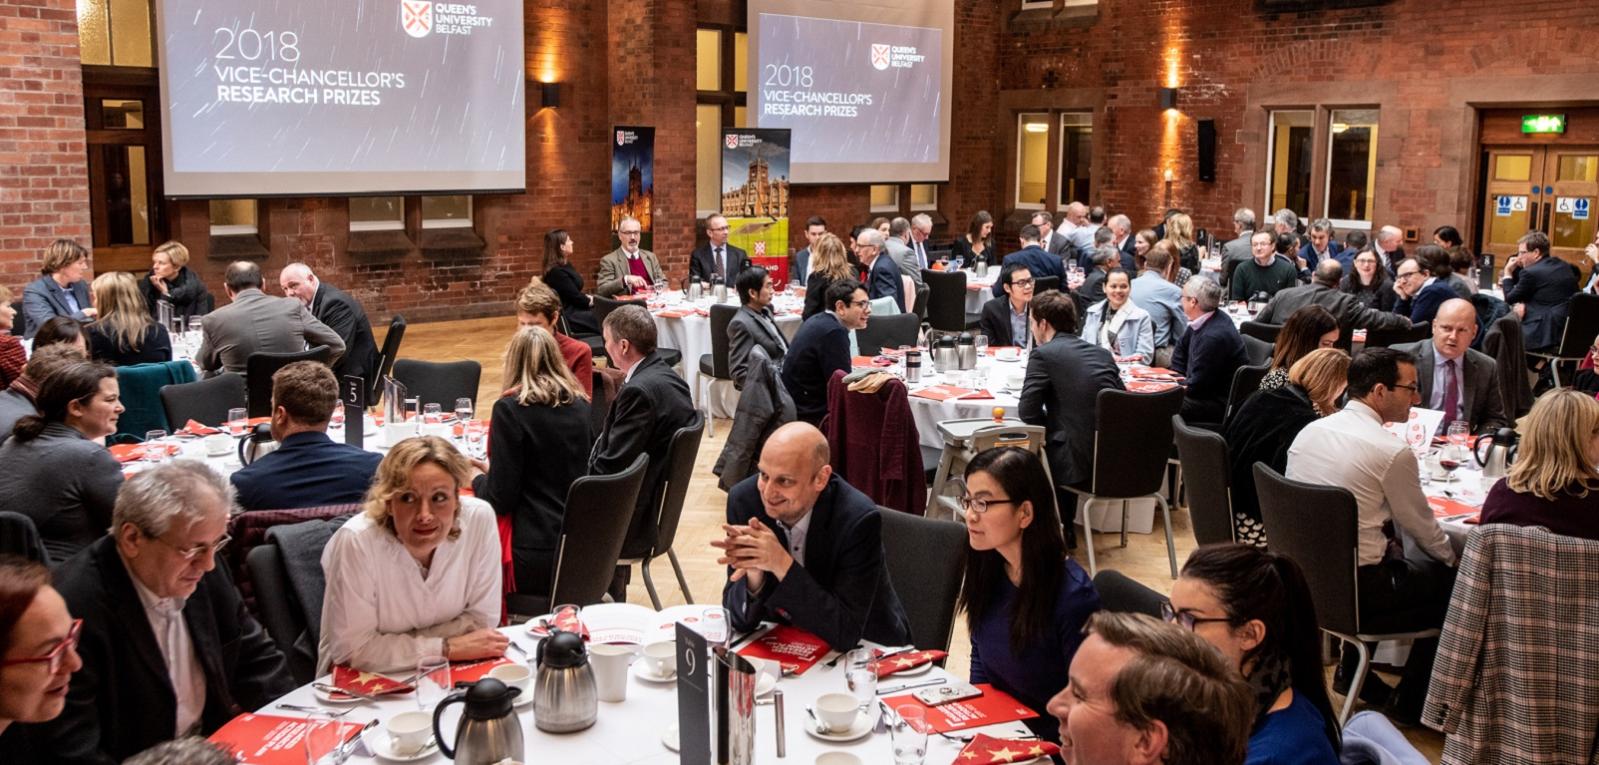 Winners of the Vice-Chancellor's research Prizes 2018 were announced at an awards lunch hosted by the Vice-Chancellor, Professor Ian Greer, in Riddel Hall.